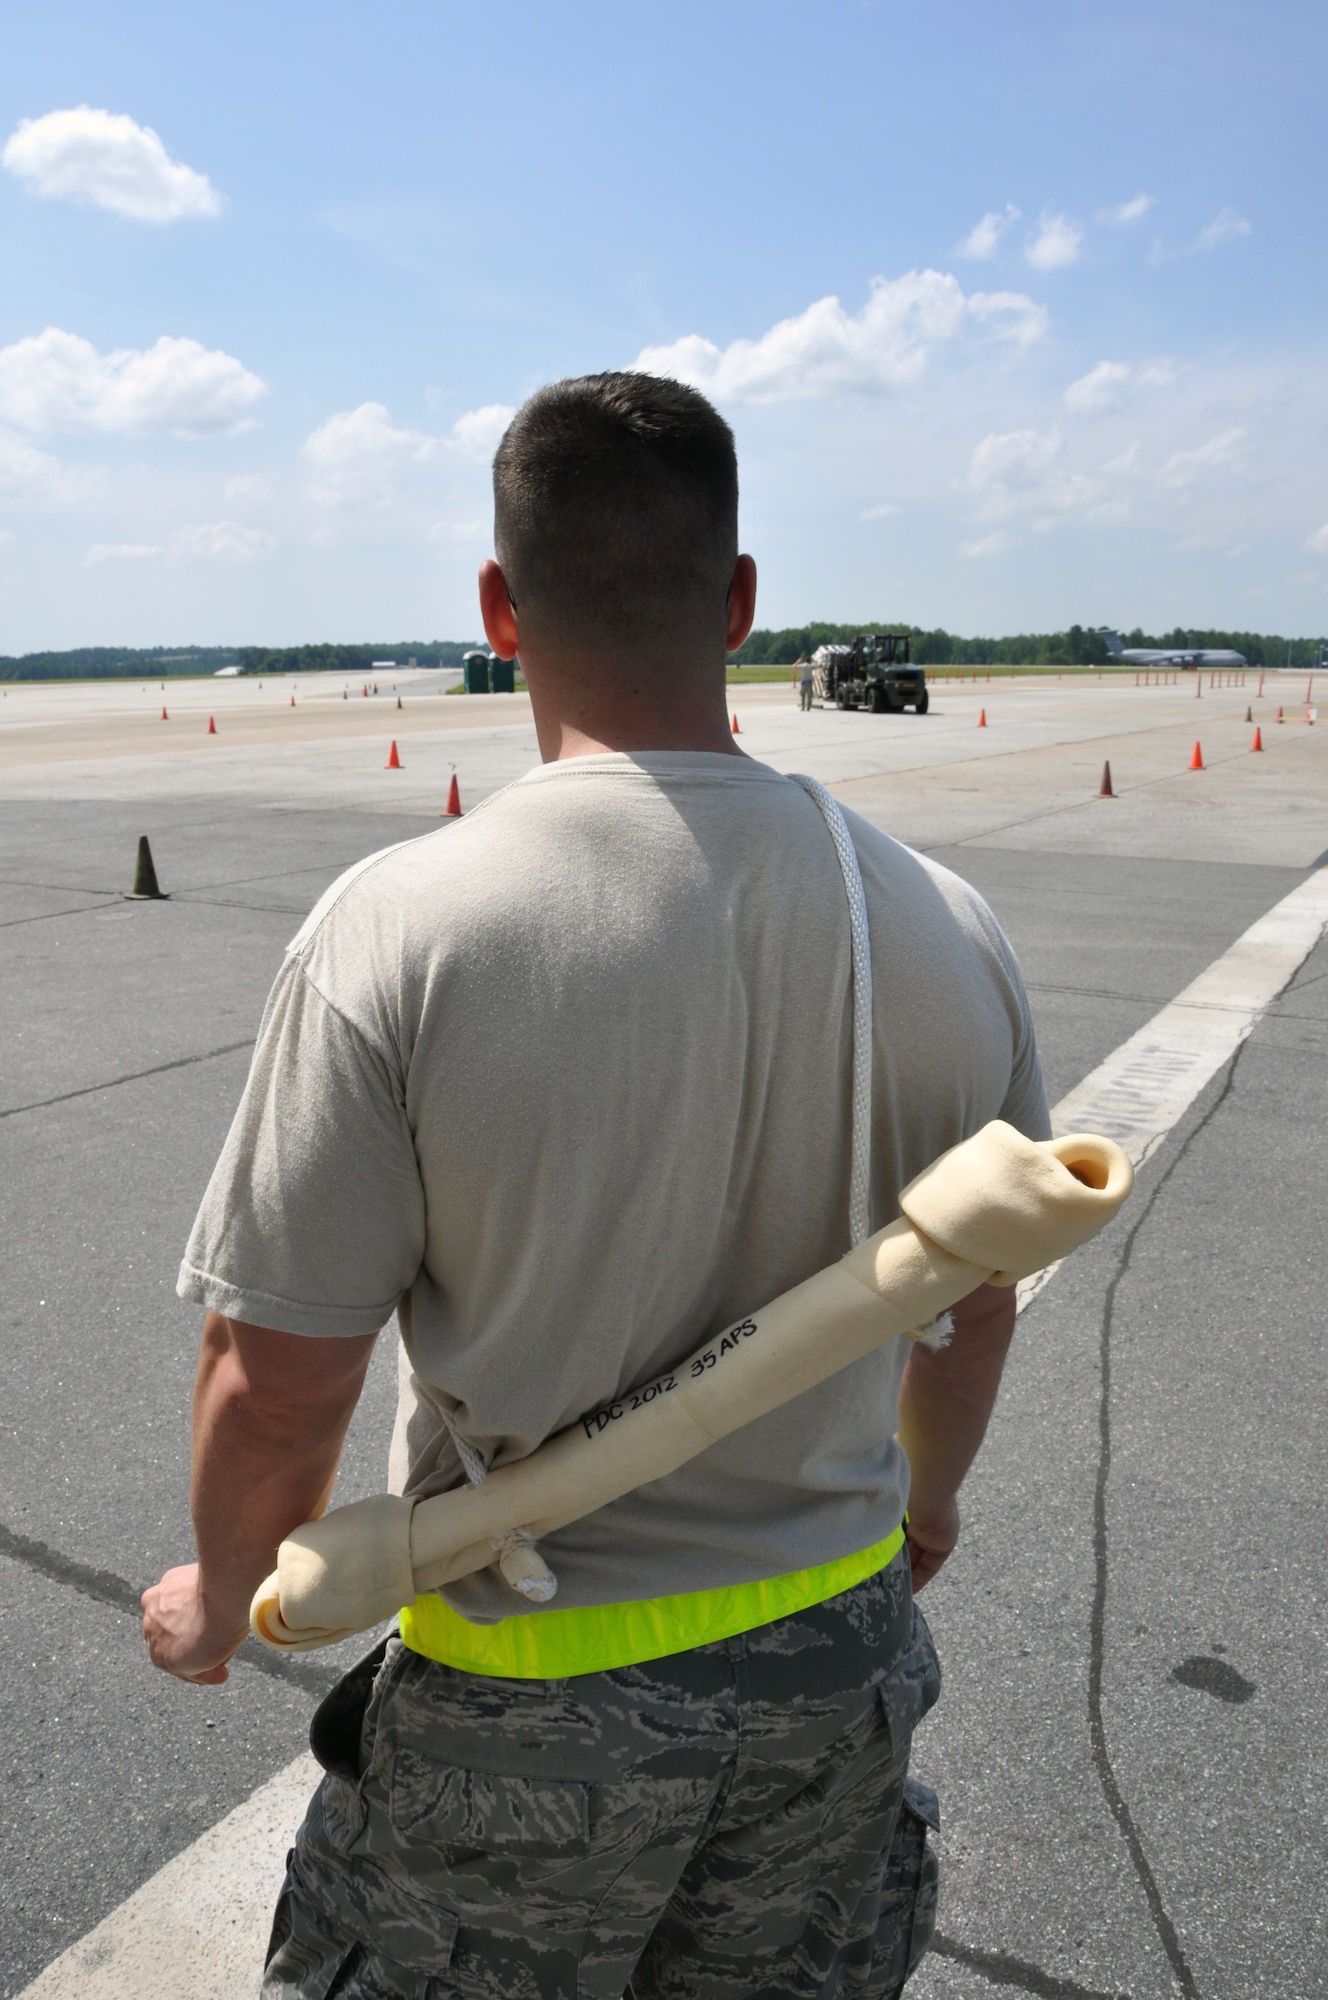 Senior Airman Wayne Rose, of the 35th Aerial Port Squadron, Joint Base McGuire-Dix-Lakehurst, guards his team’s Dawg bone from would-be “thieves” on other teams. This was one of many challenges that Port Dawg teams face at this biennium’s Port Dawg Challenge June 19-21 at Dobbins ARB. (U.S. Air Force photo/Senior Airman Elizabeth Gaston)